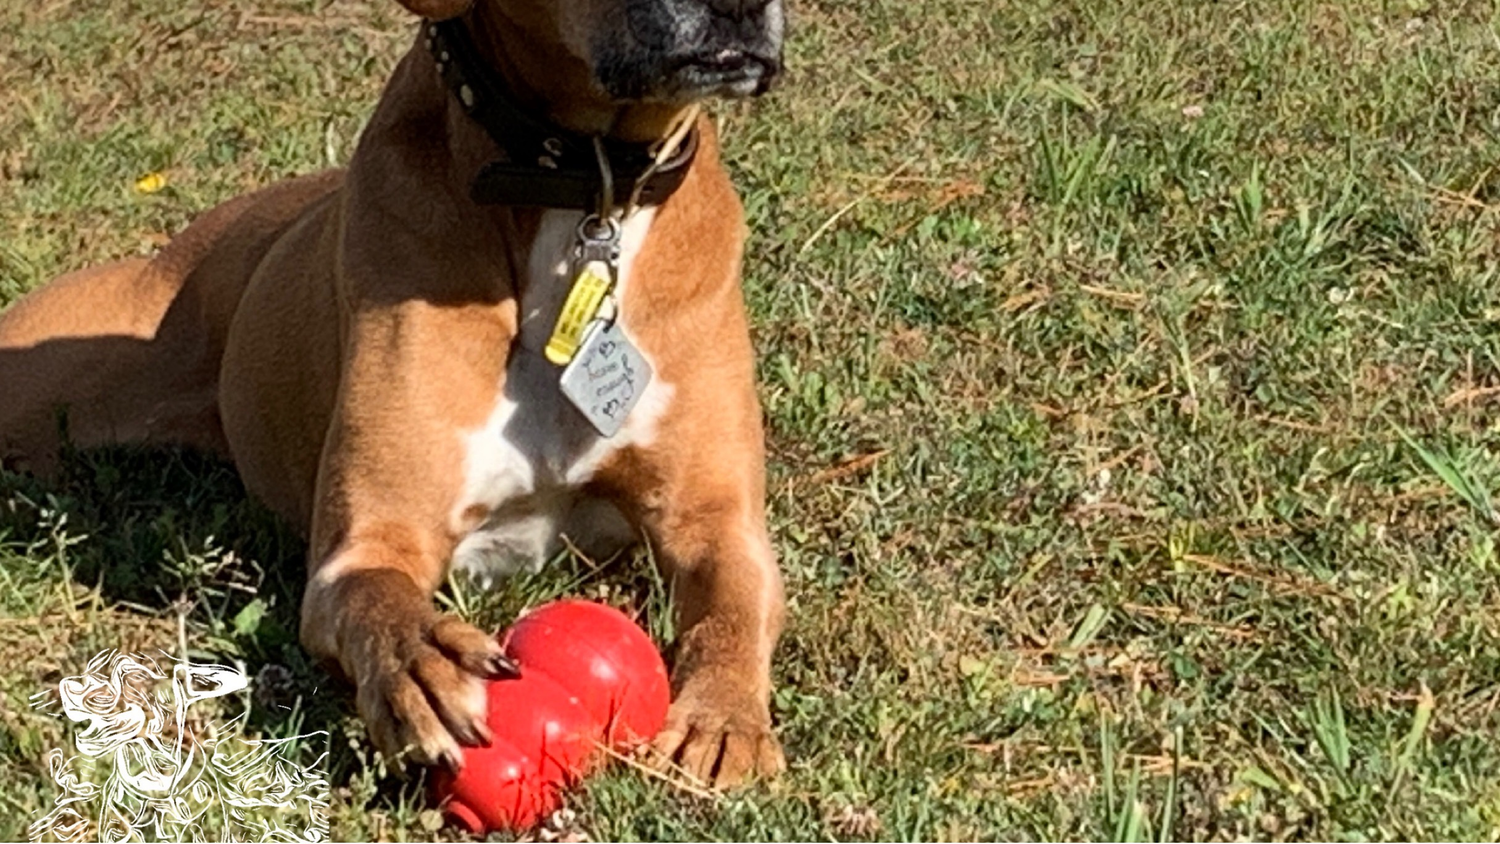 Boxer dog with a red ball on grass.